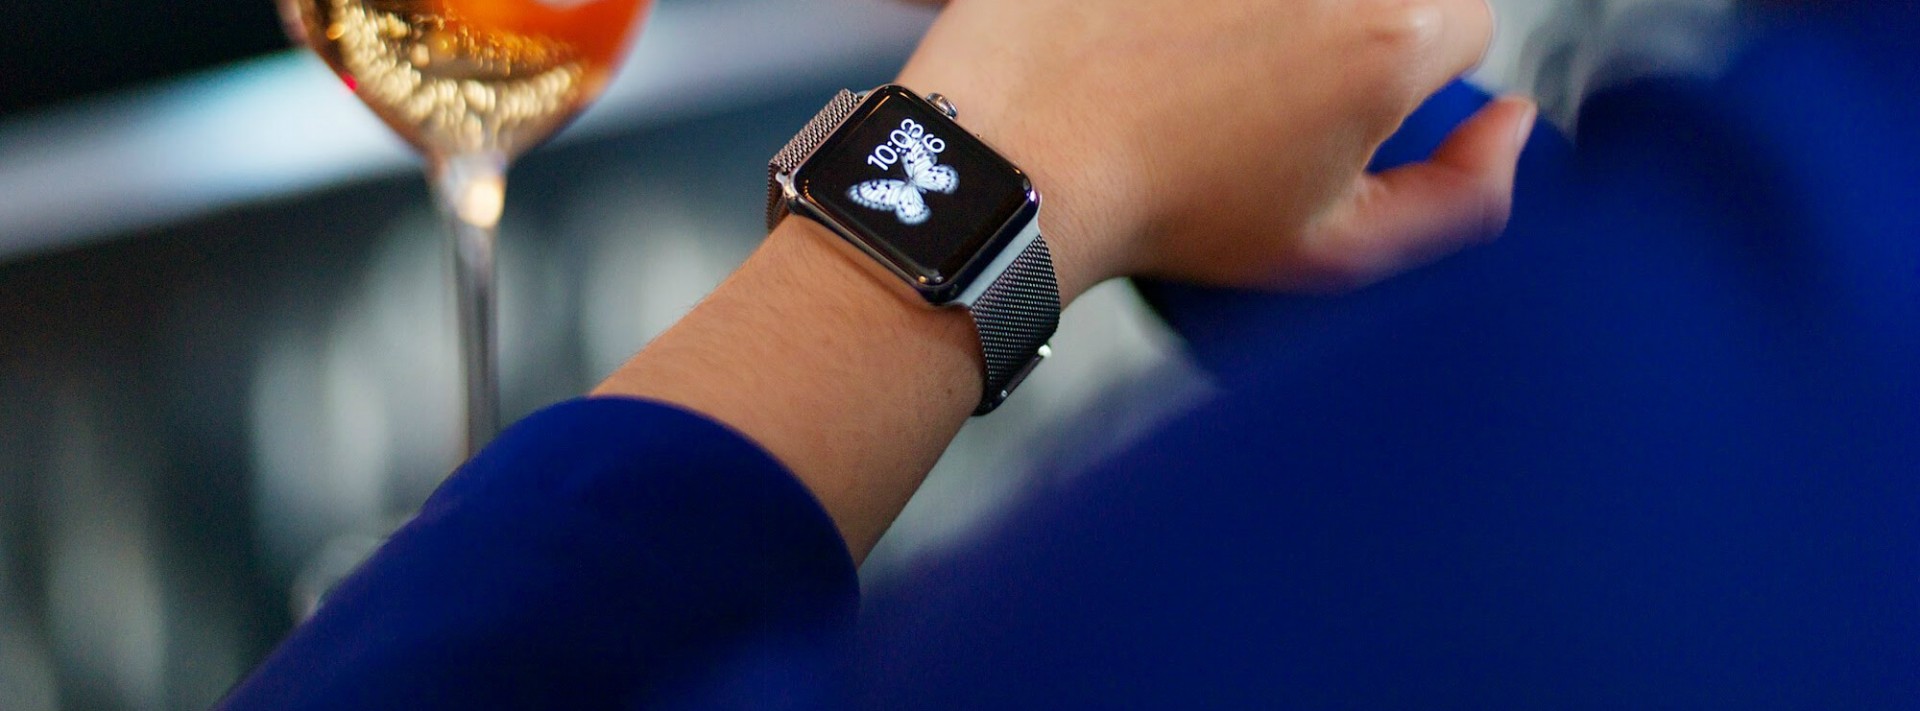 Taking a Glimpse at Apple Watch Apps